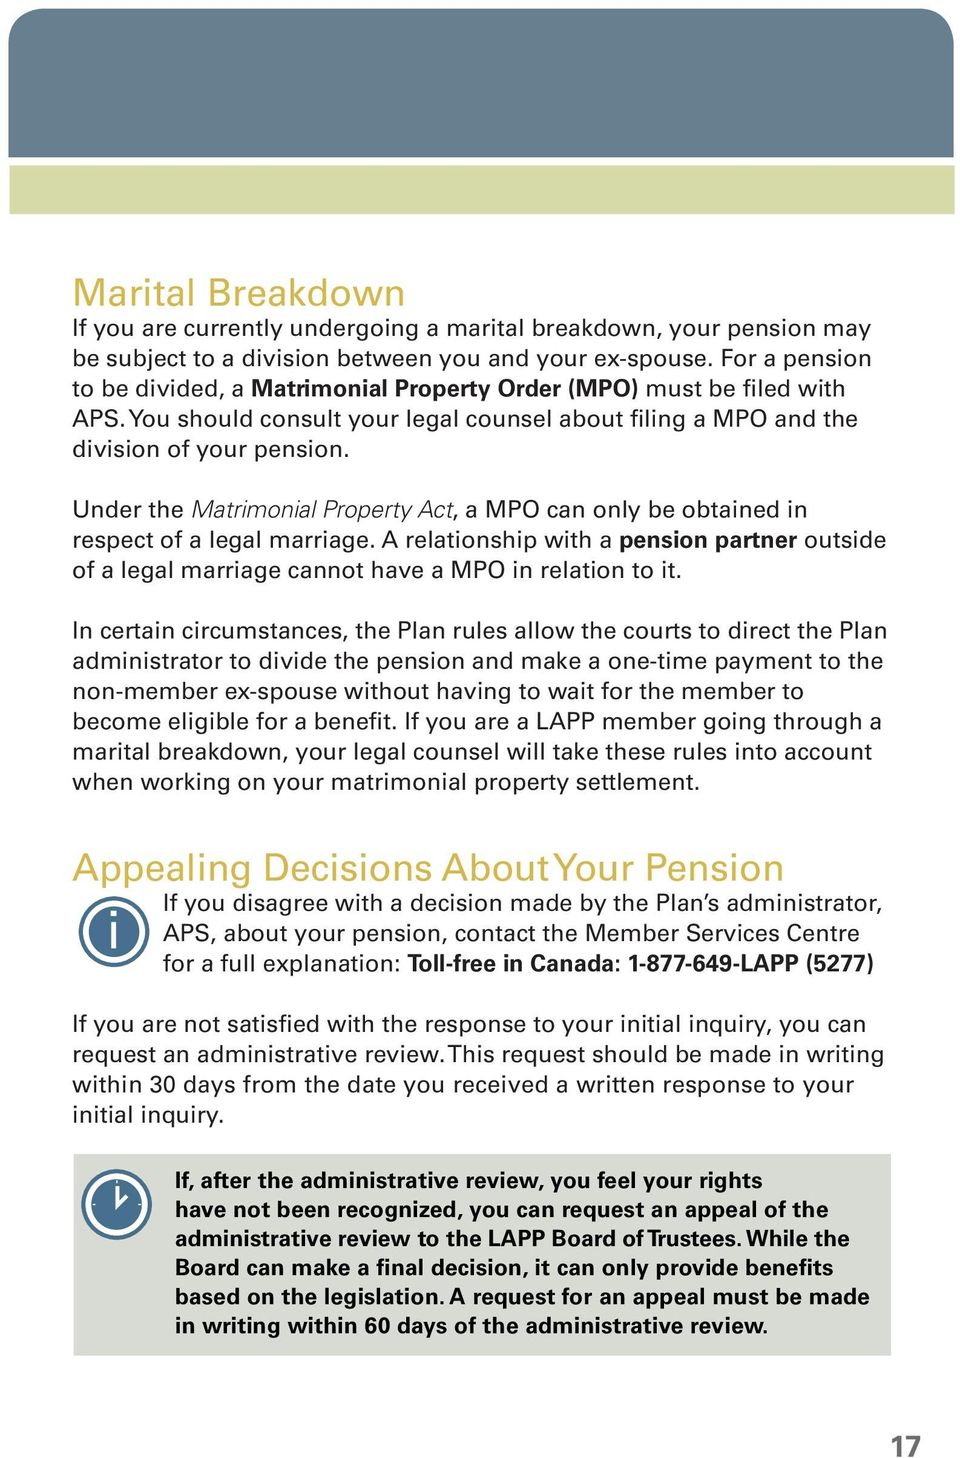 Under the Matrimonial Property Act, a MPO can only be obtained in respect of a legal marriage. A relationship with a pension partner outside of a legal marriage cannot have a MPO in relation to it.